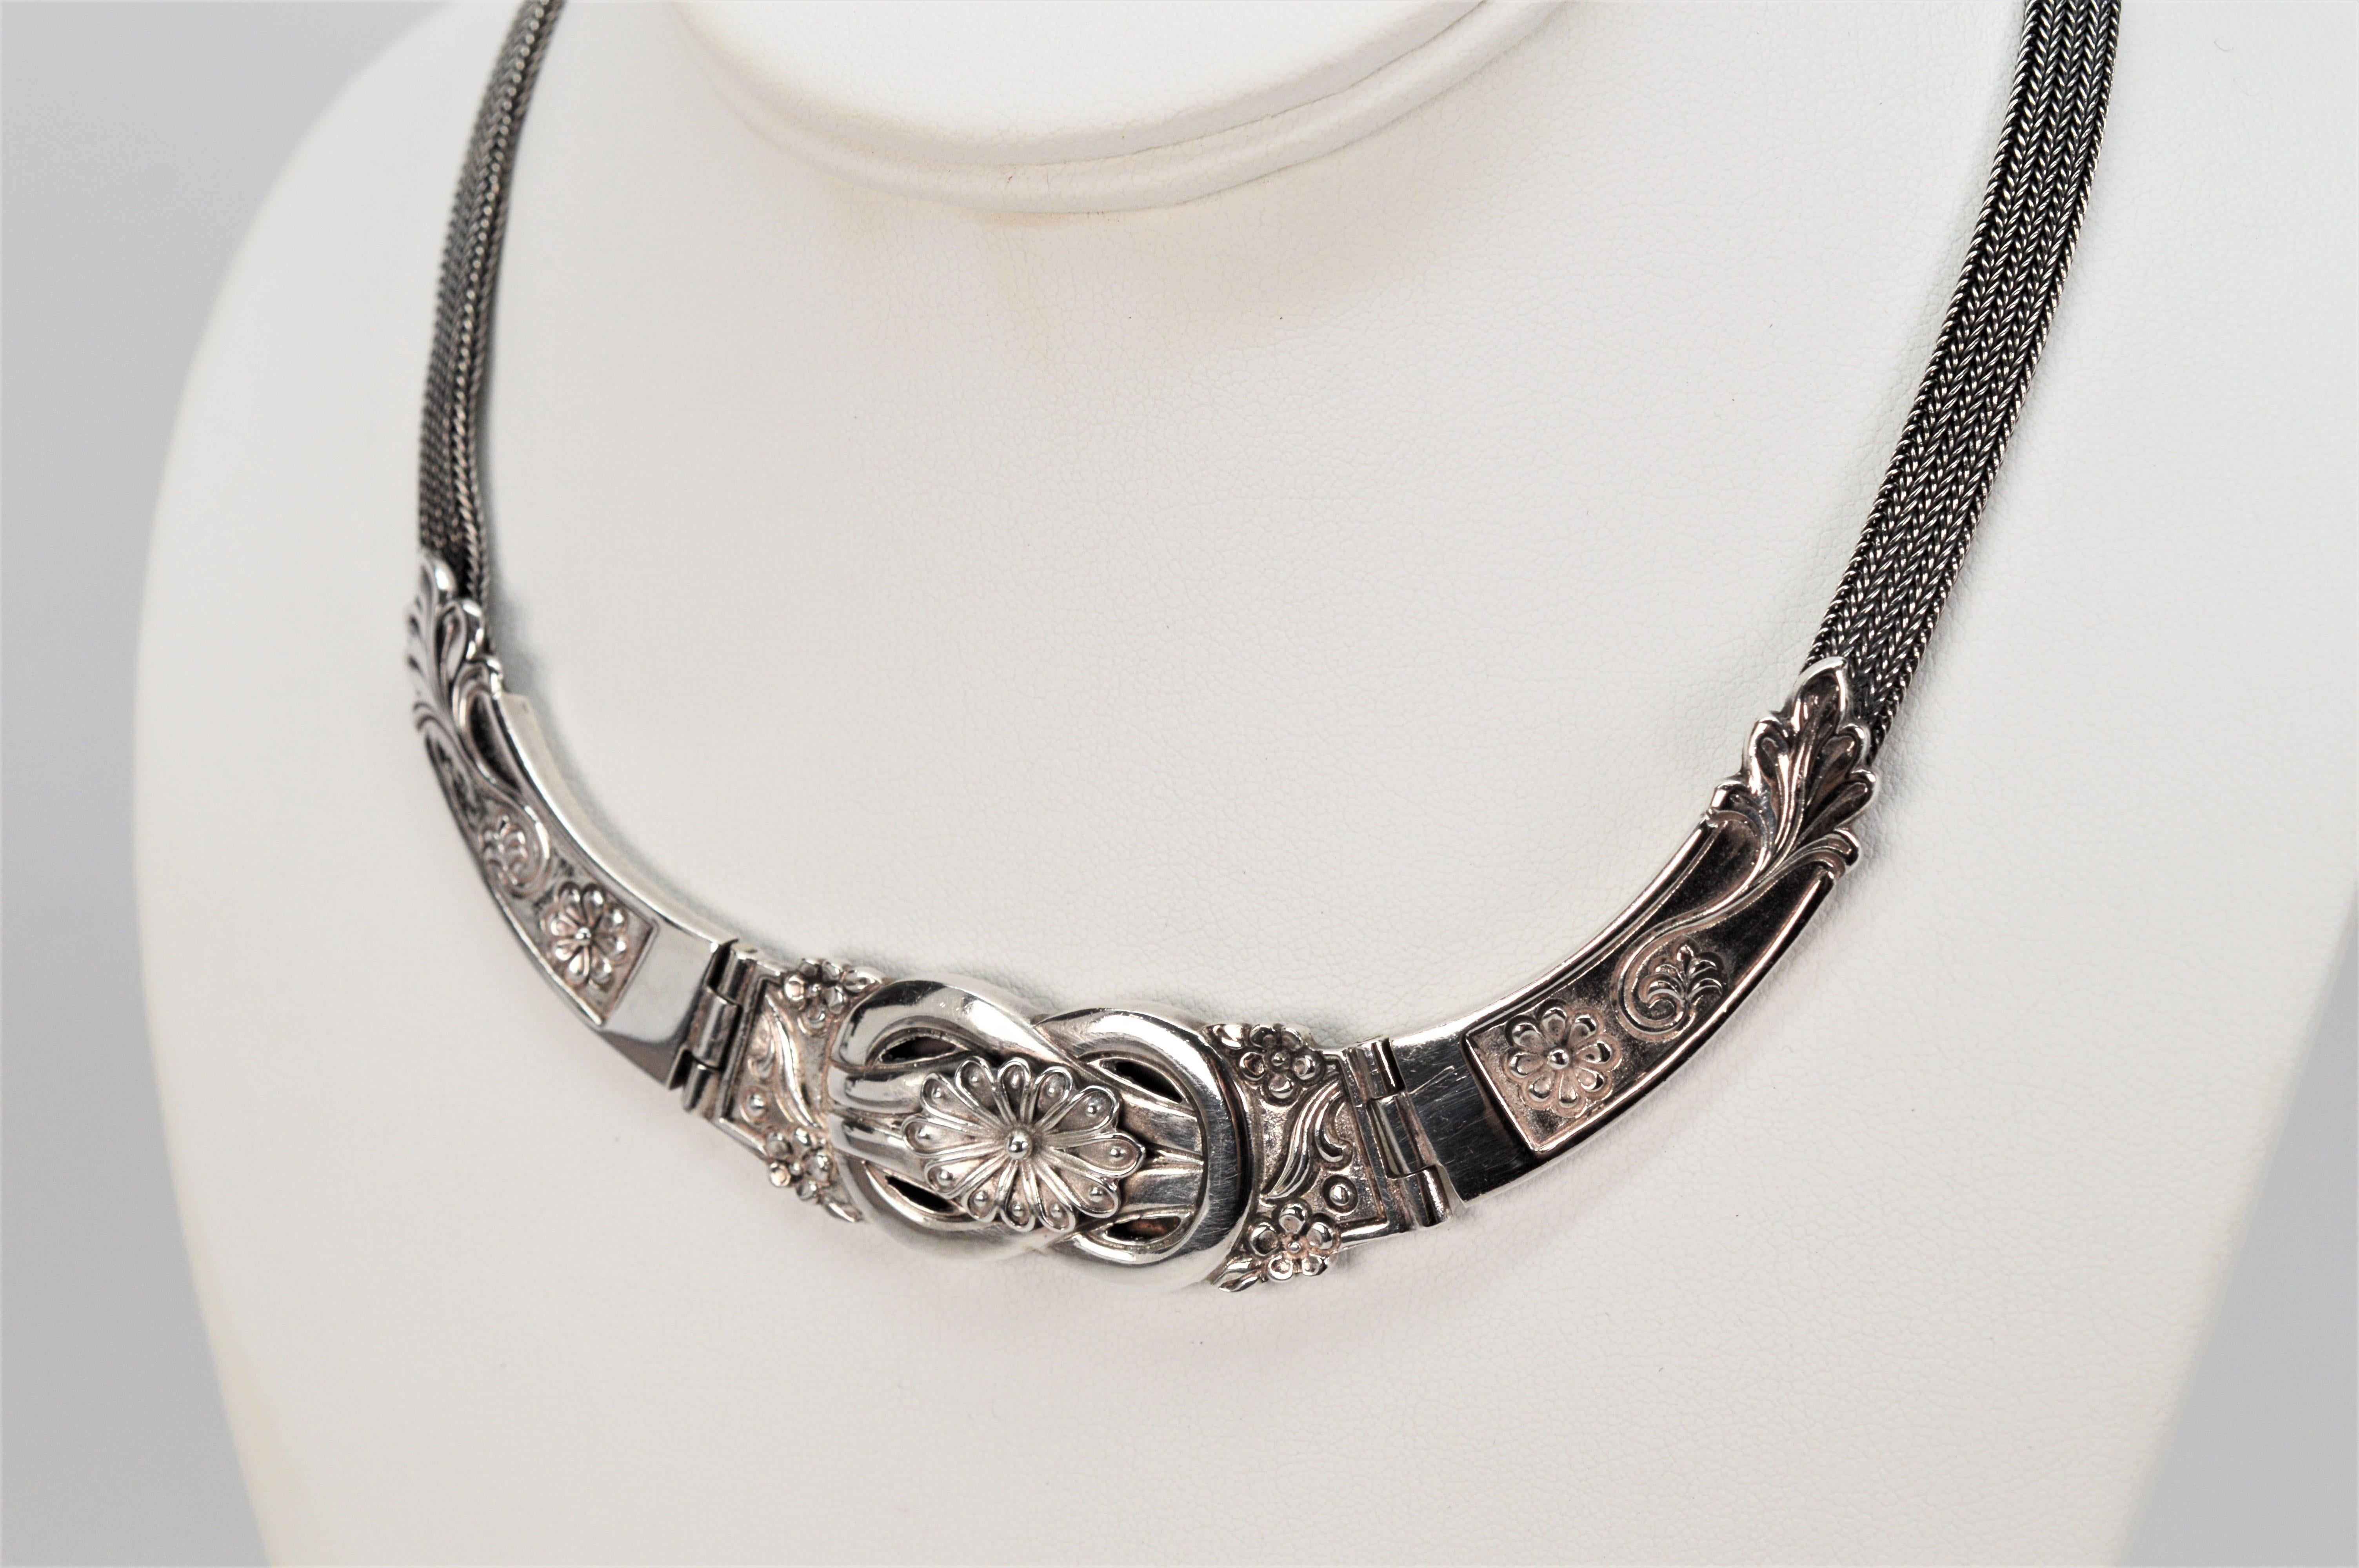 Women's Sterling Silver Heirloom Floral Panel Collar Necklace